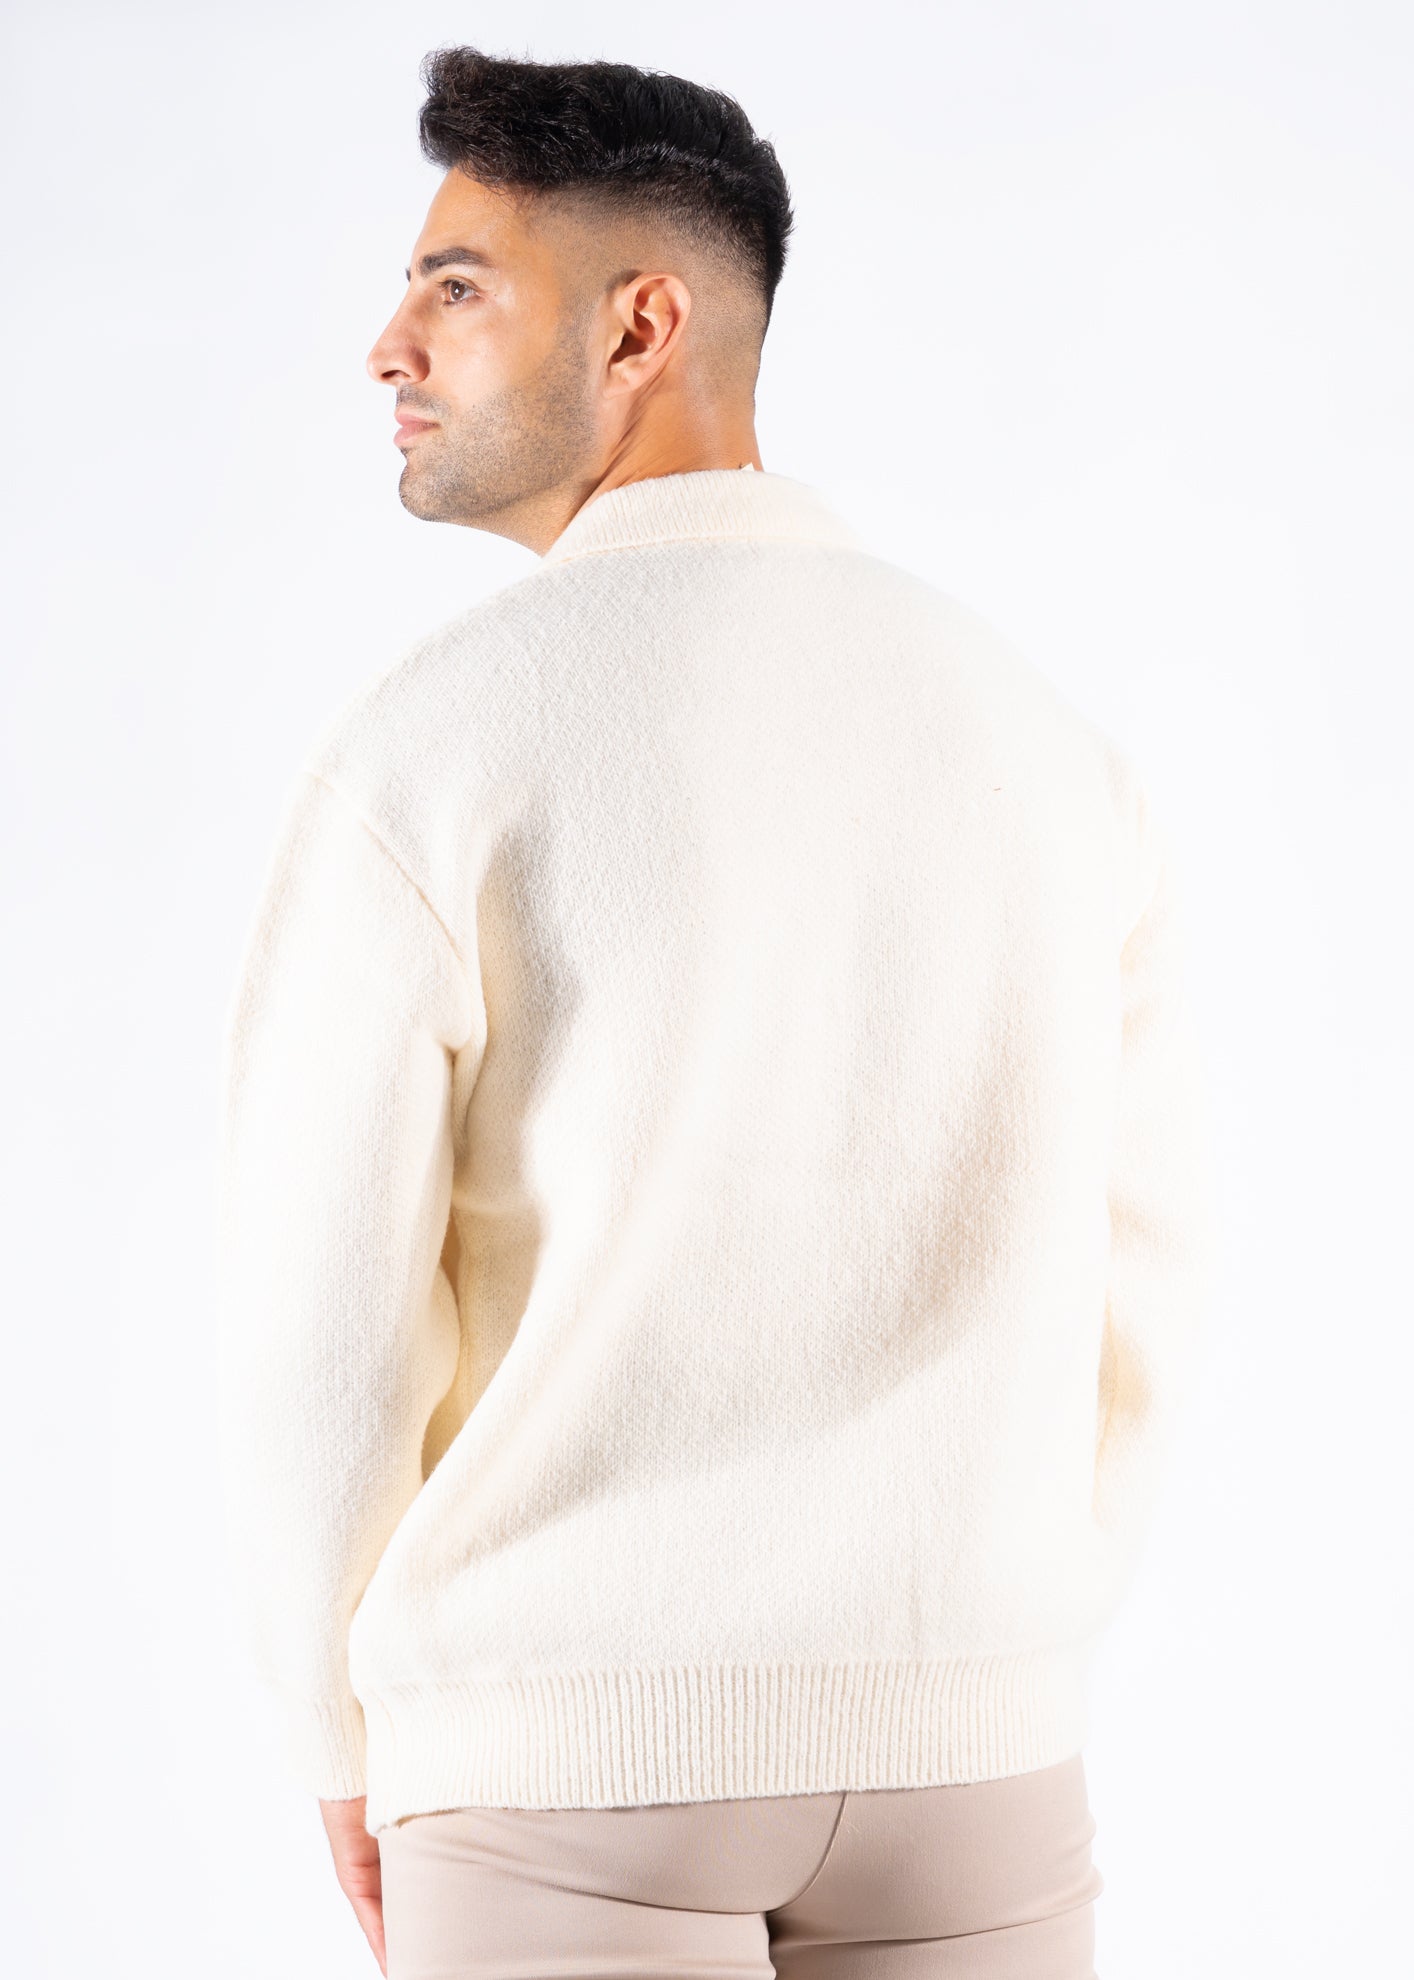 Sweater polo knitted off white oversized